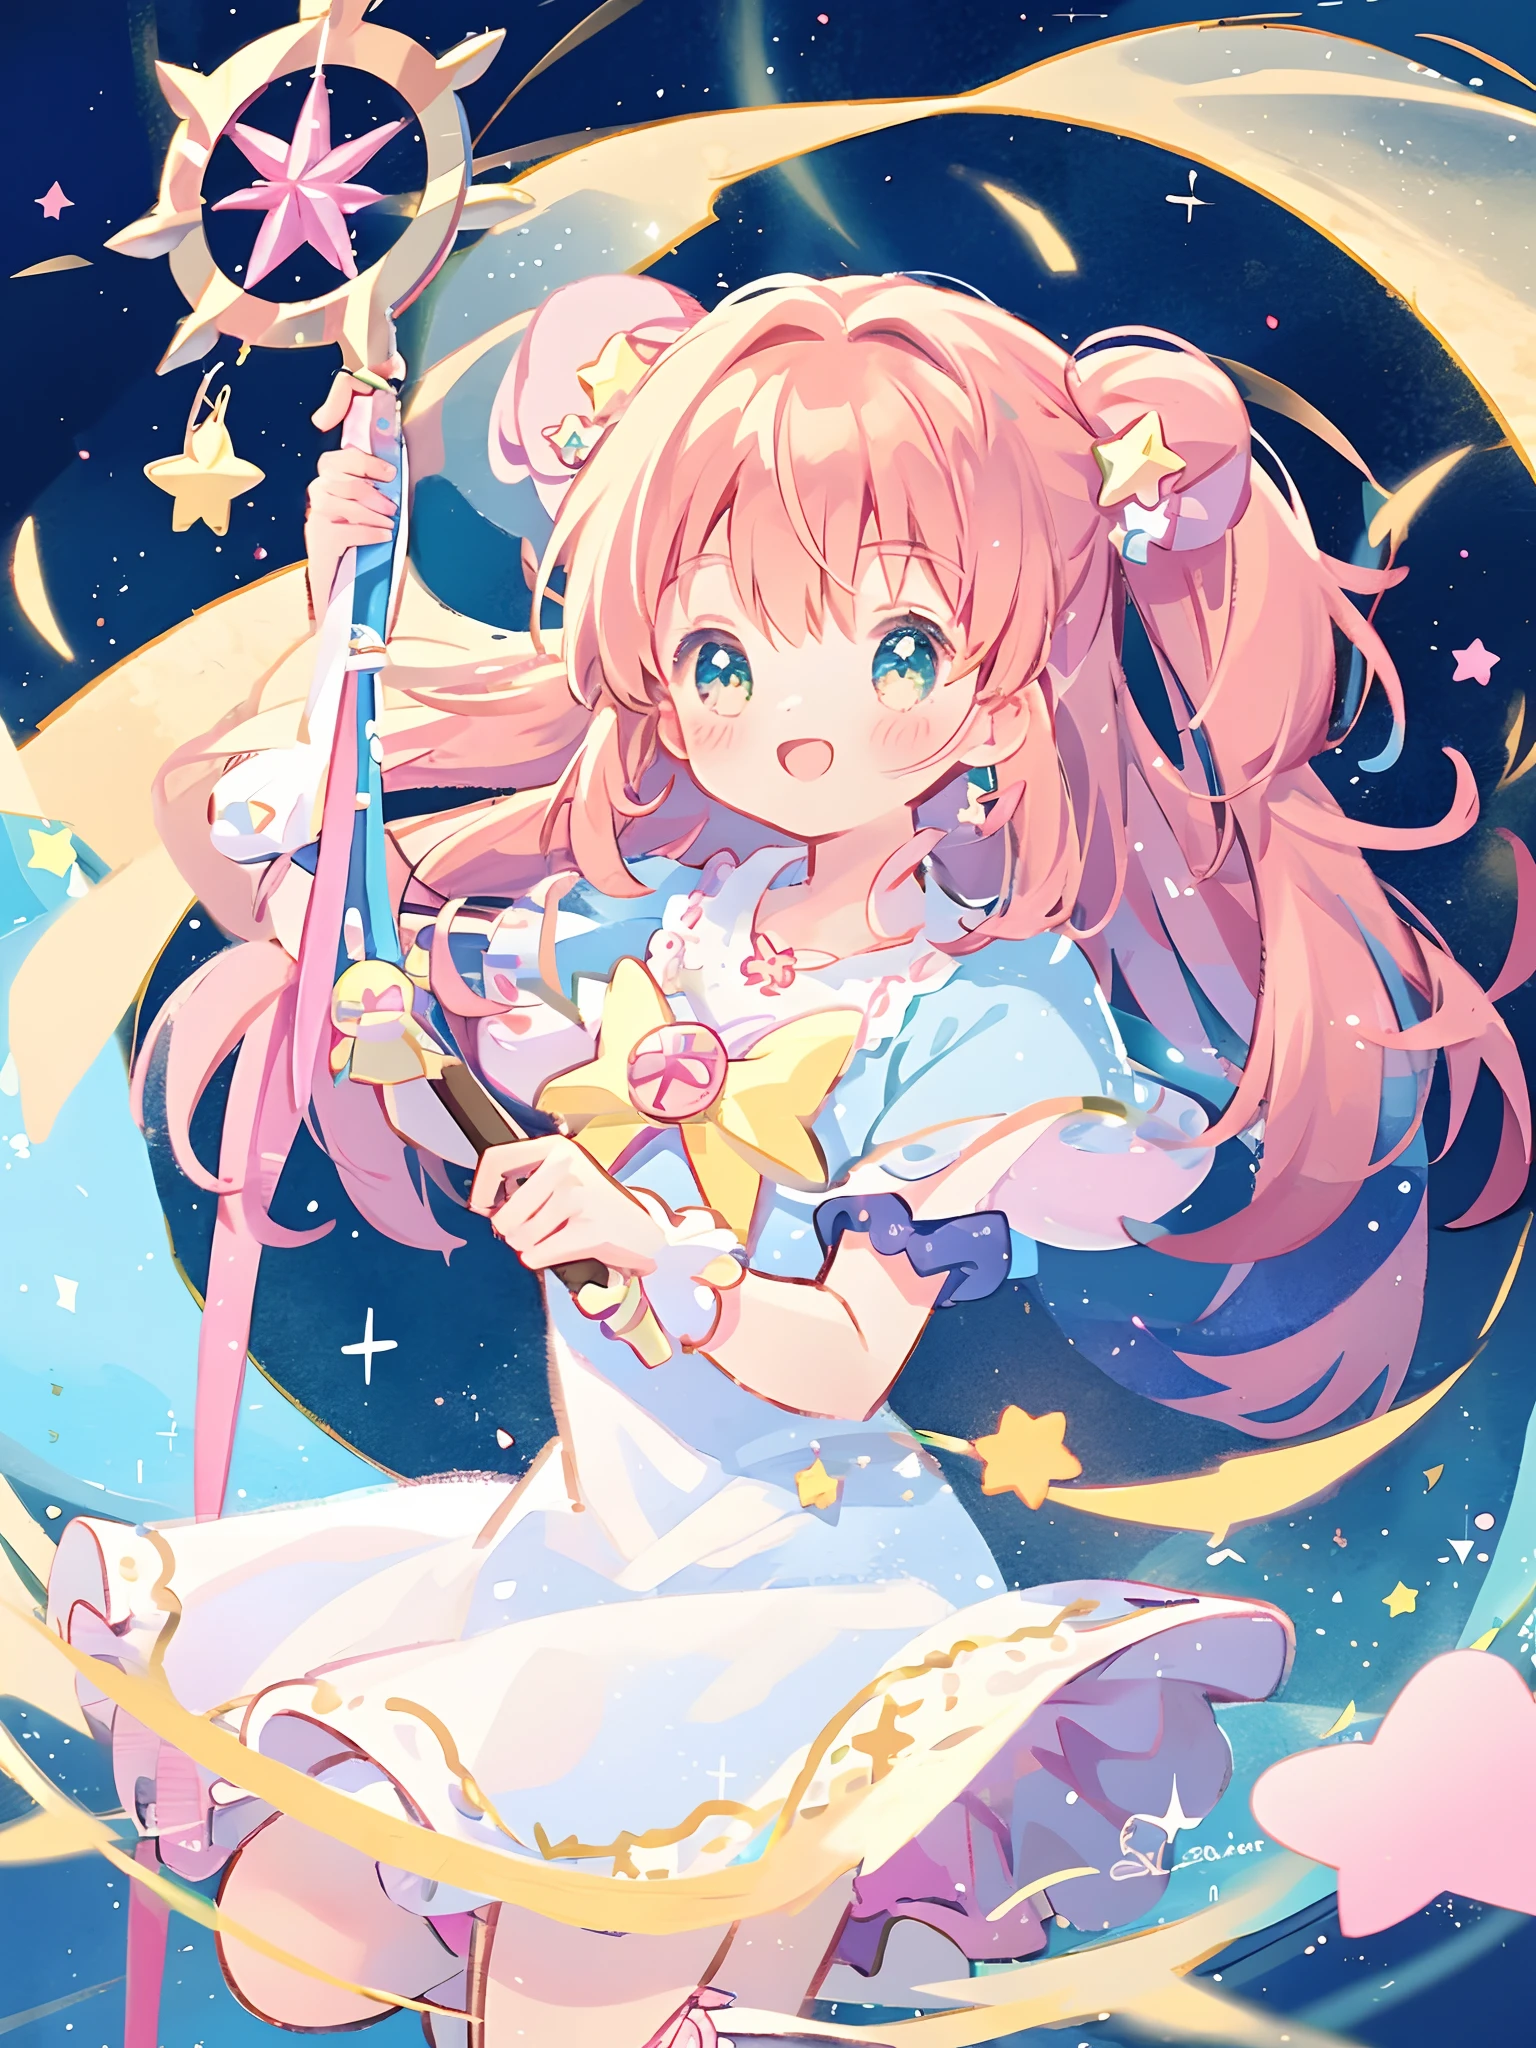 k hd，Anime girl with wand and star wand in her hand, portrait of magical girl, sparkling magical girl, magical , cardcaptor sakura, clean and meticulous anime art, magical girl anime mahou shojo, beautiful anime art style, cute anime girl portraits, carrying a magical staff, zerochan art, lovely art style, astral fairy, Soft anime illustration